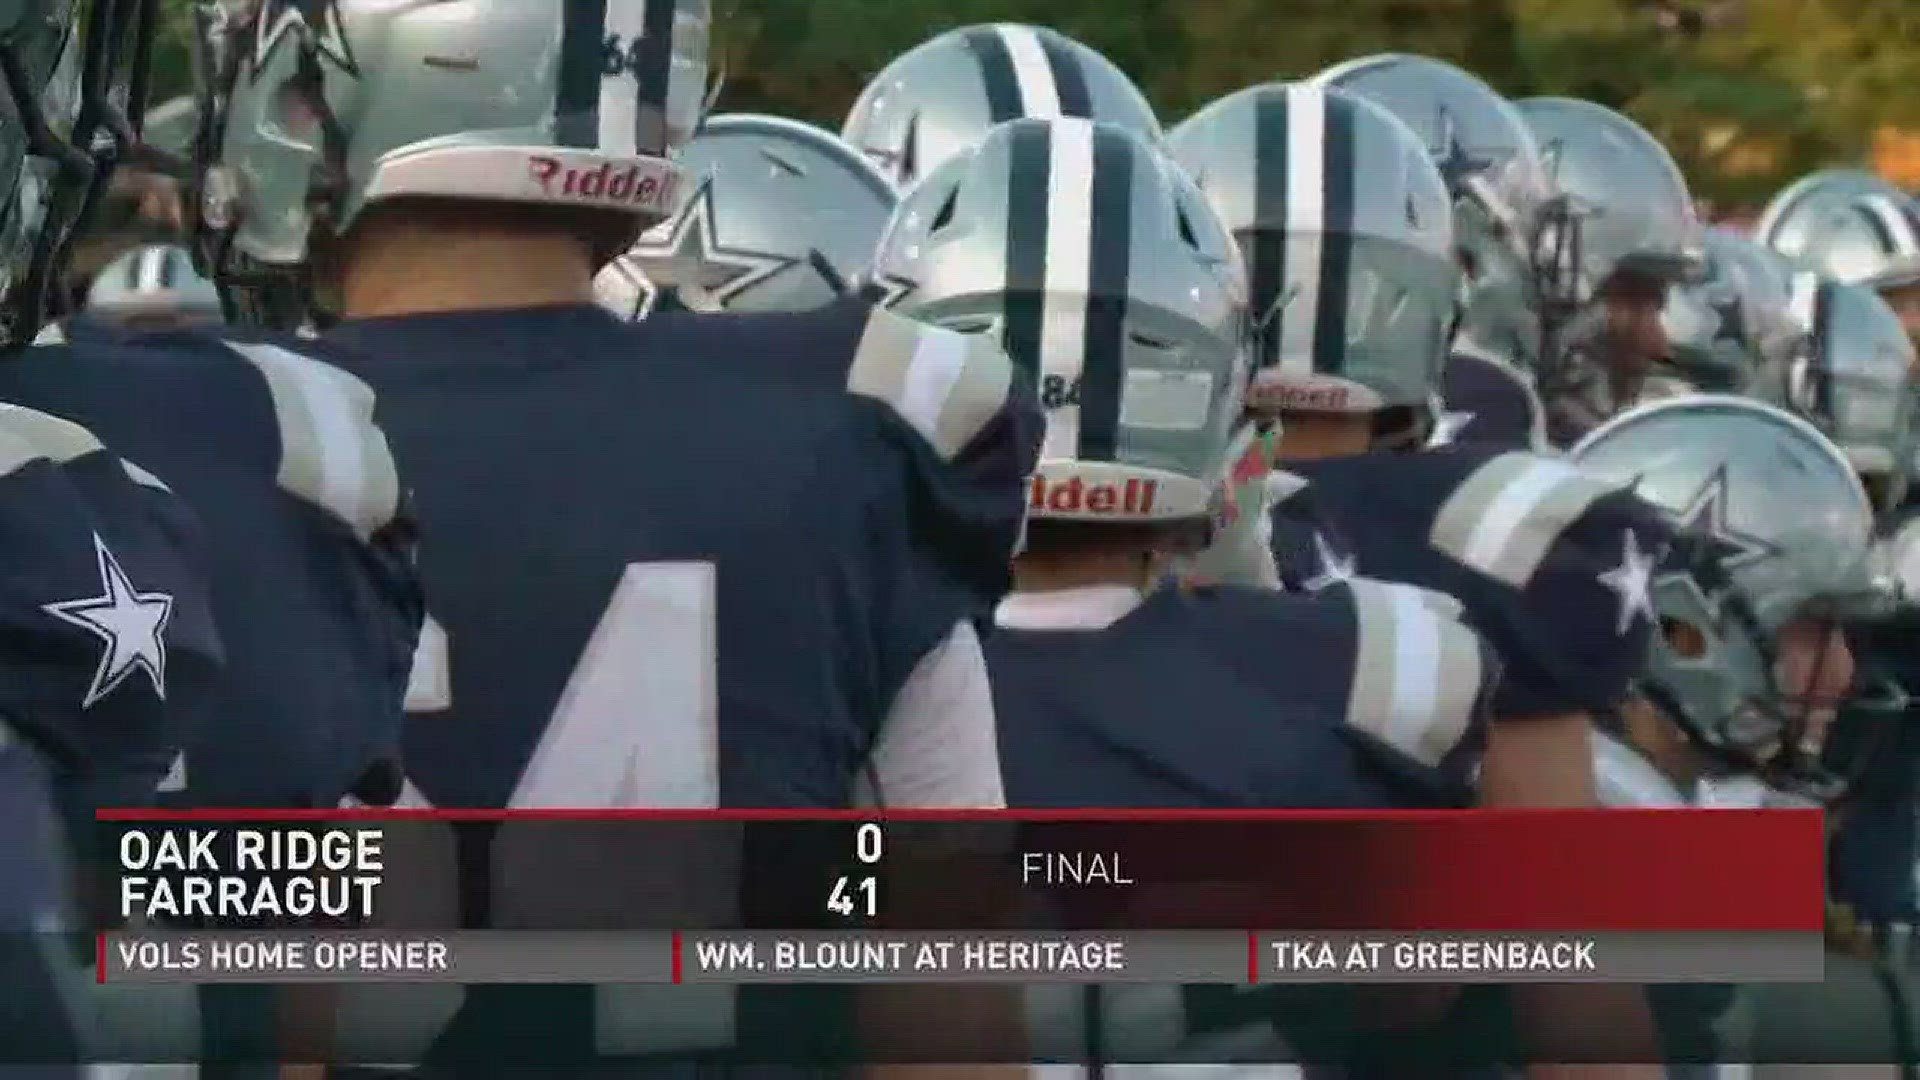 Farragut shuts out the Wildcats for the first time since 1993.